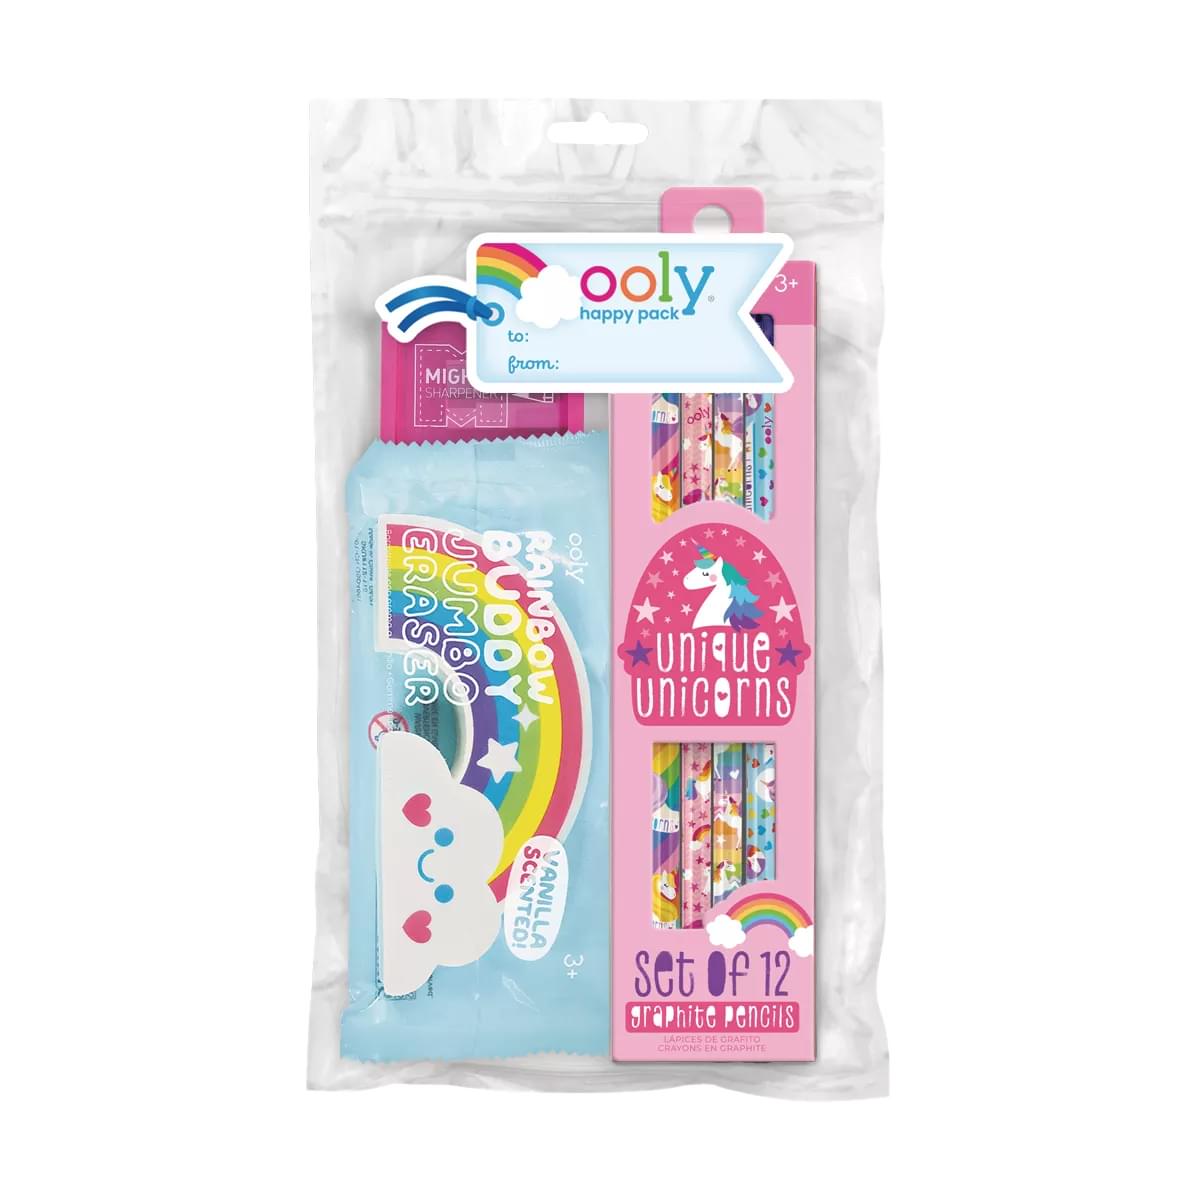 OOLY Unicorn Happy pack in giftable pouch and gift label